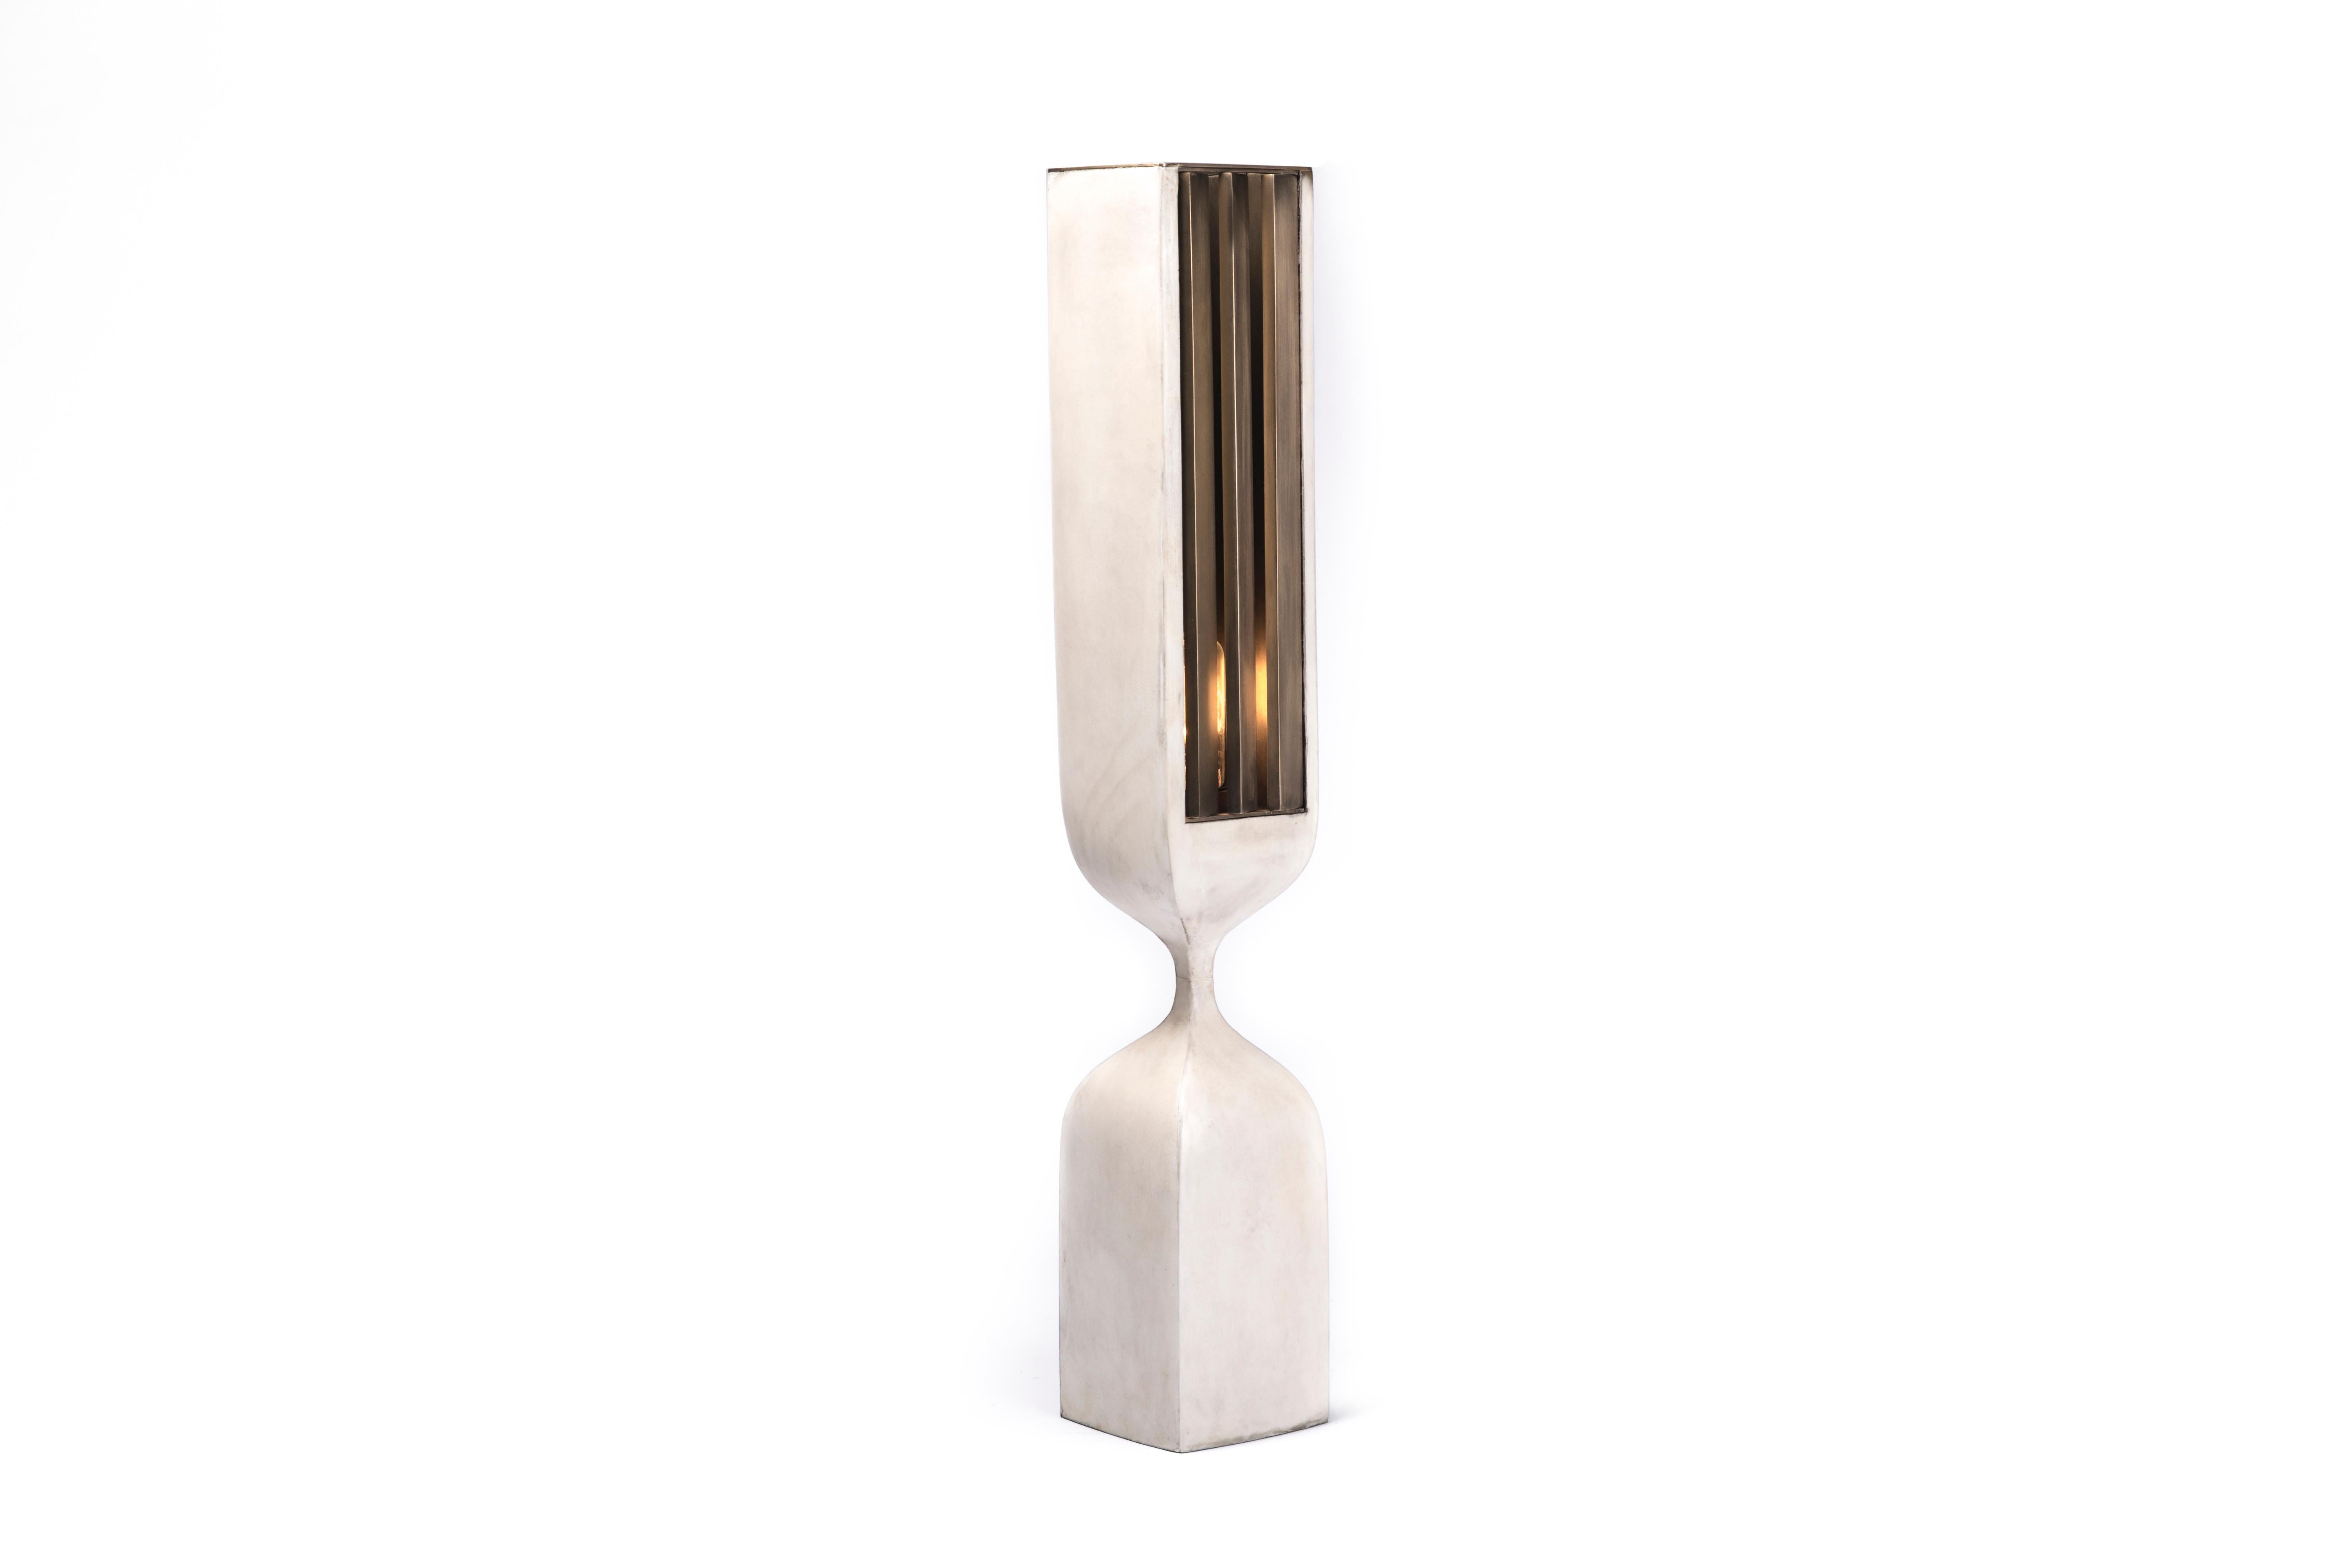 Patrick Coard Paris launches a unique and beautifully sculptural lighting collection inspired by music as a continuation of his candle line. The Rhapsody table lamp in bronze-patina brass and cream parchment is an ethereal and sculptural piece. The